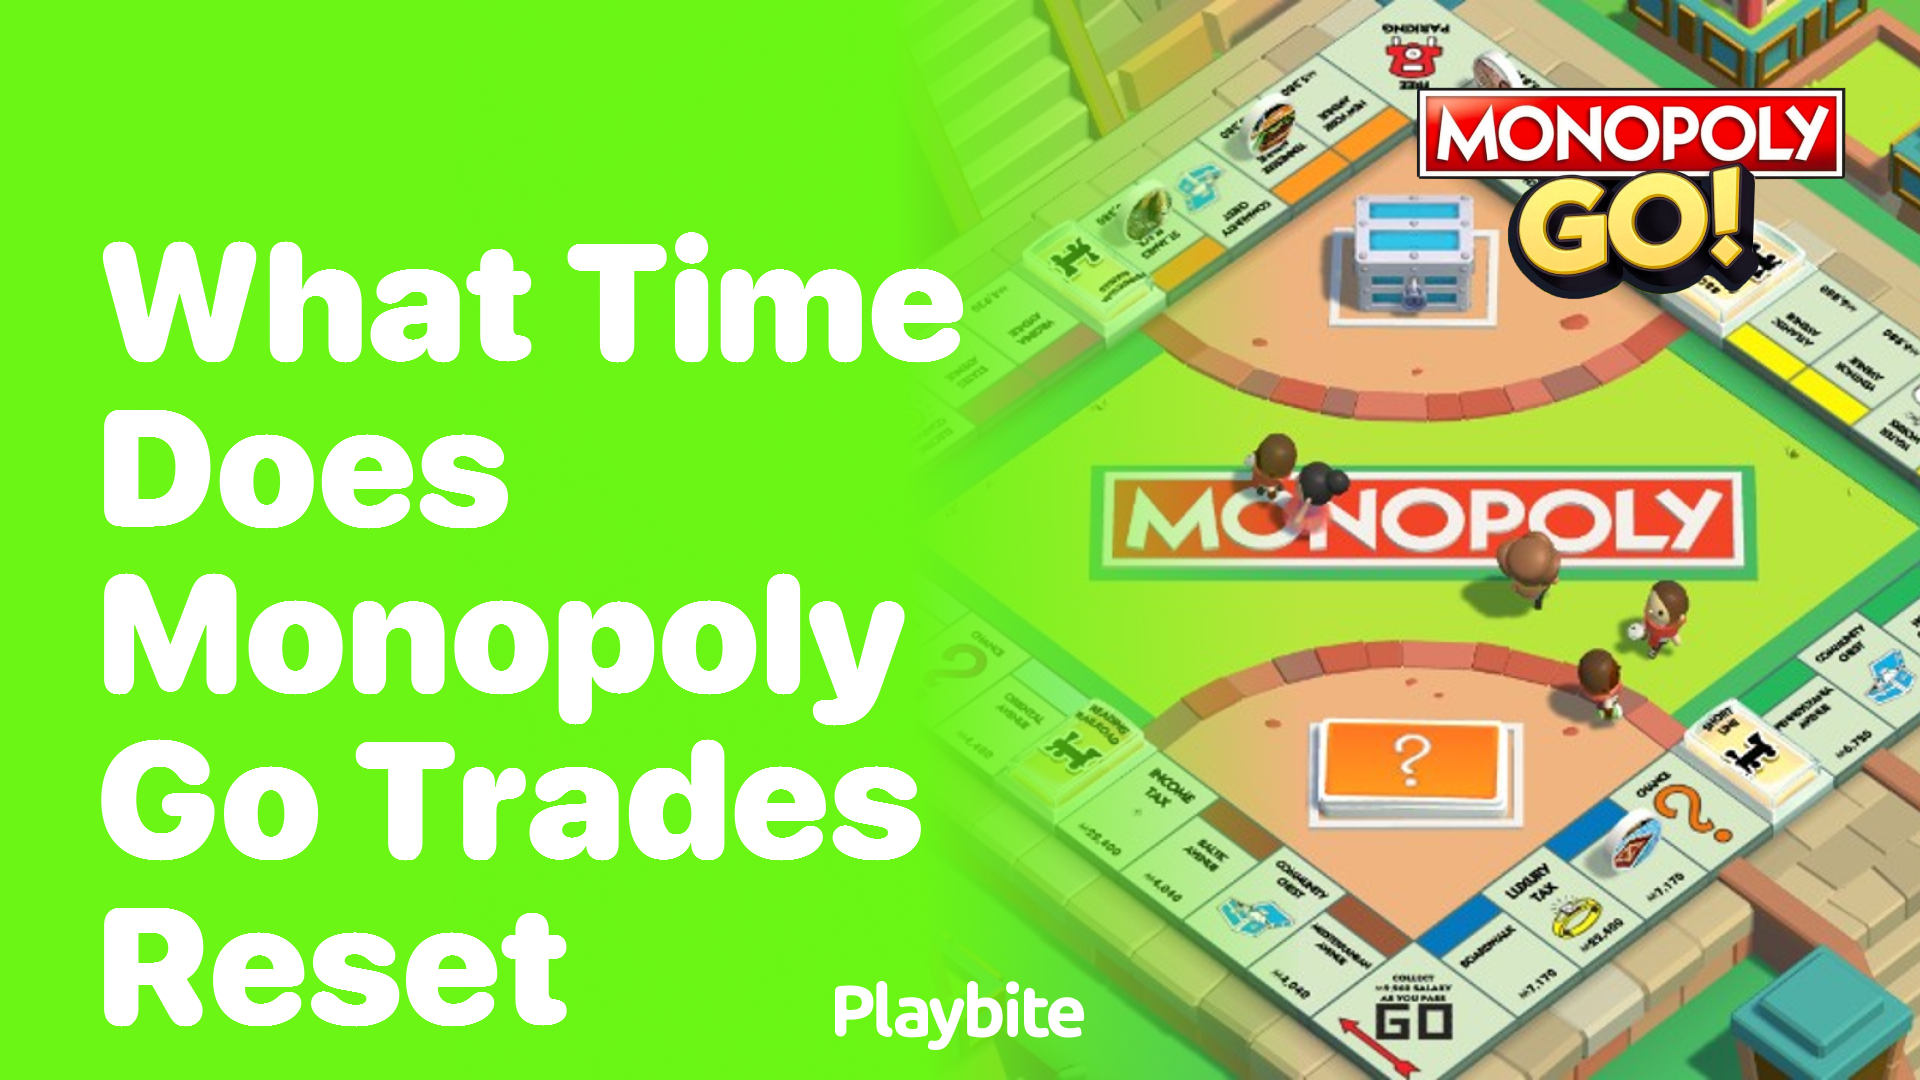 What Time Does Monopoly Go Trades Reset? Find Out Here!